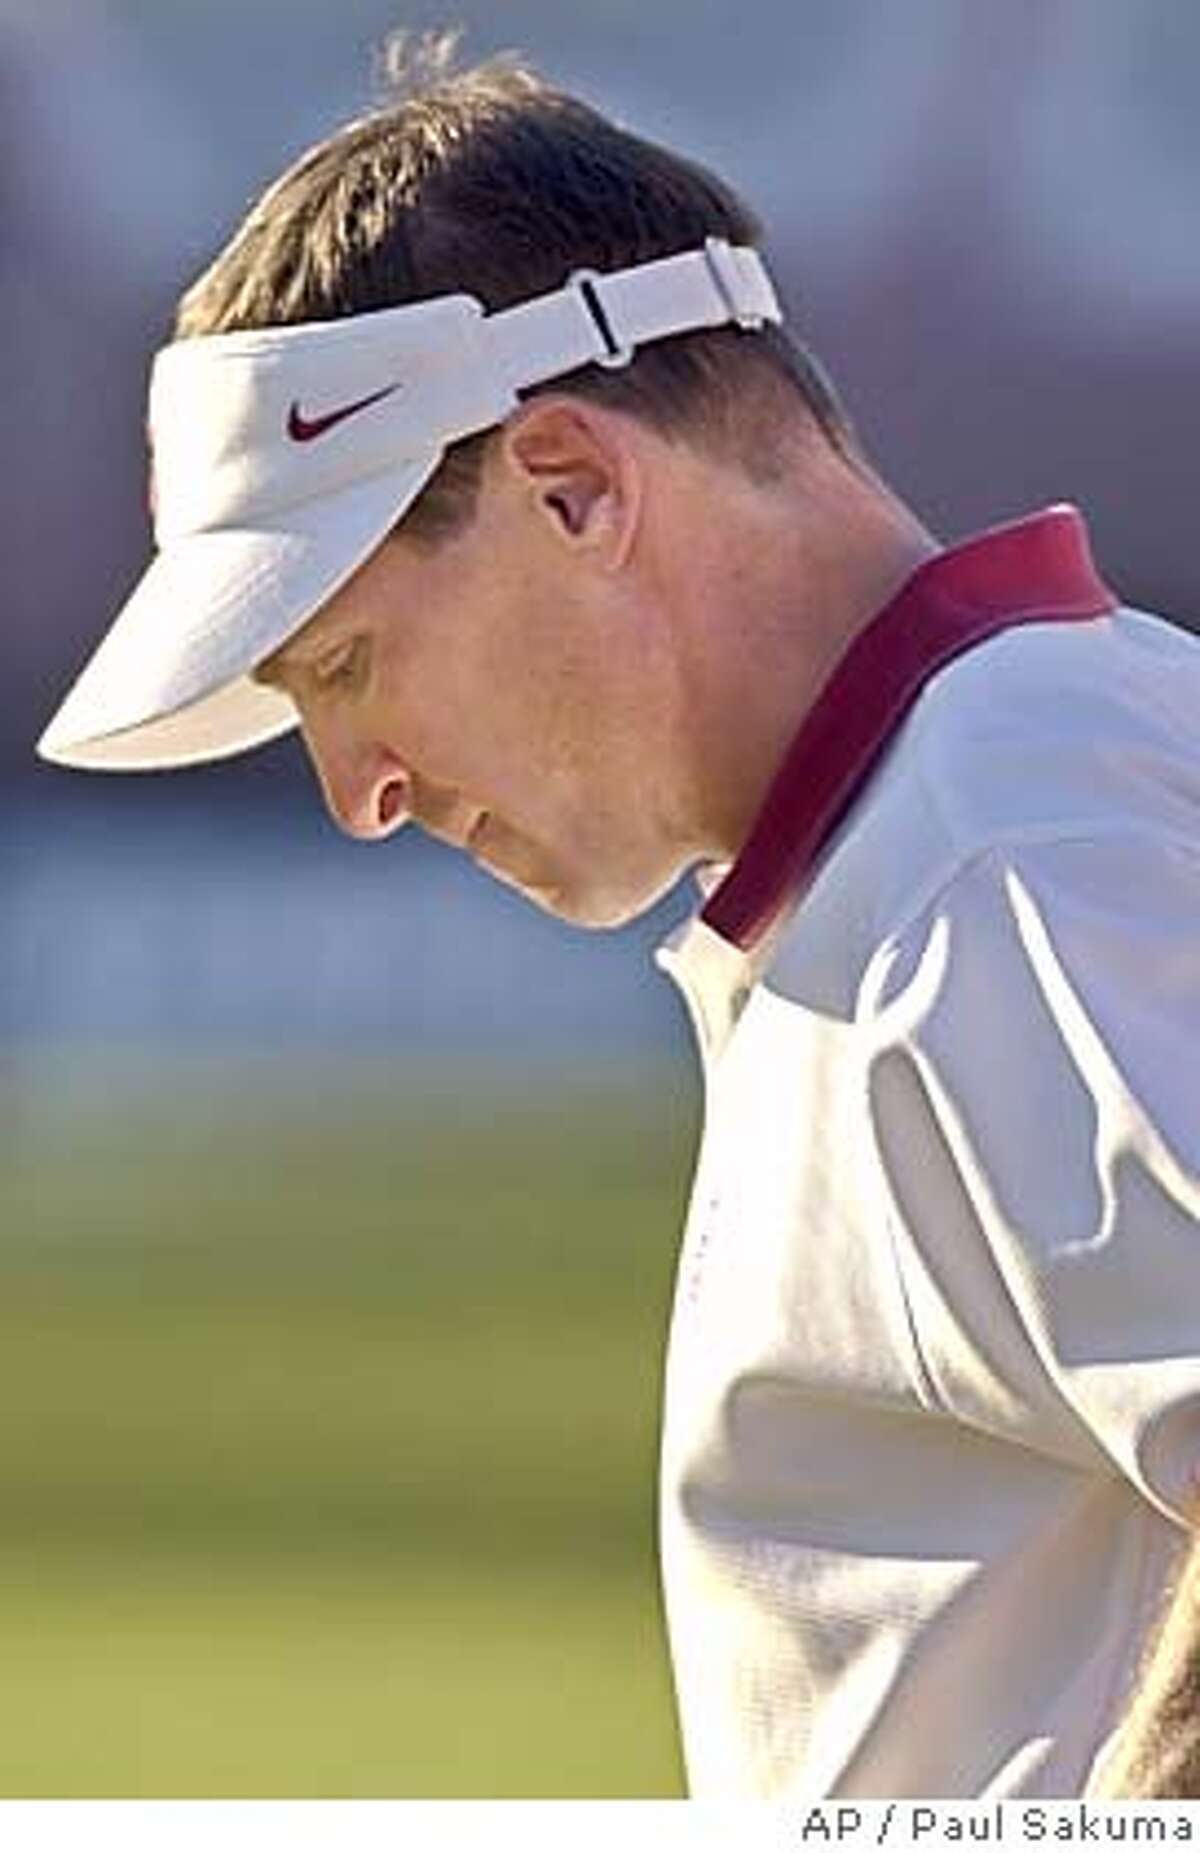 Stanford head coach Buddy Teevens looks down in the last minute of Stanford's 36-11 lost to Washington State, Saturday, Oct. 12, 2002 in Stanford, Calif. (AP Photo/Paul Sakuma) sports color skybox please expedite Projects#Sports#Chronicle#11/29/2004#ALL#5star#C1#421801417